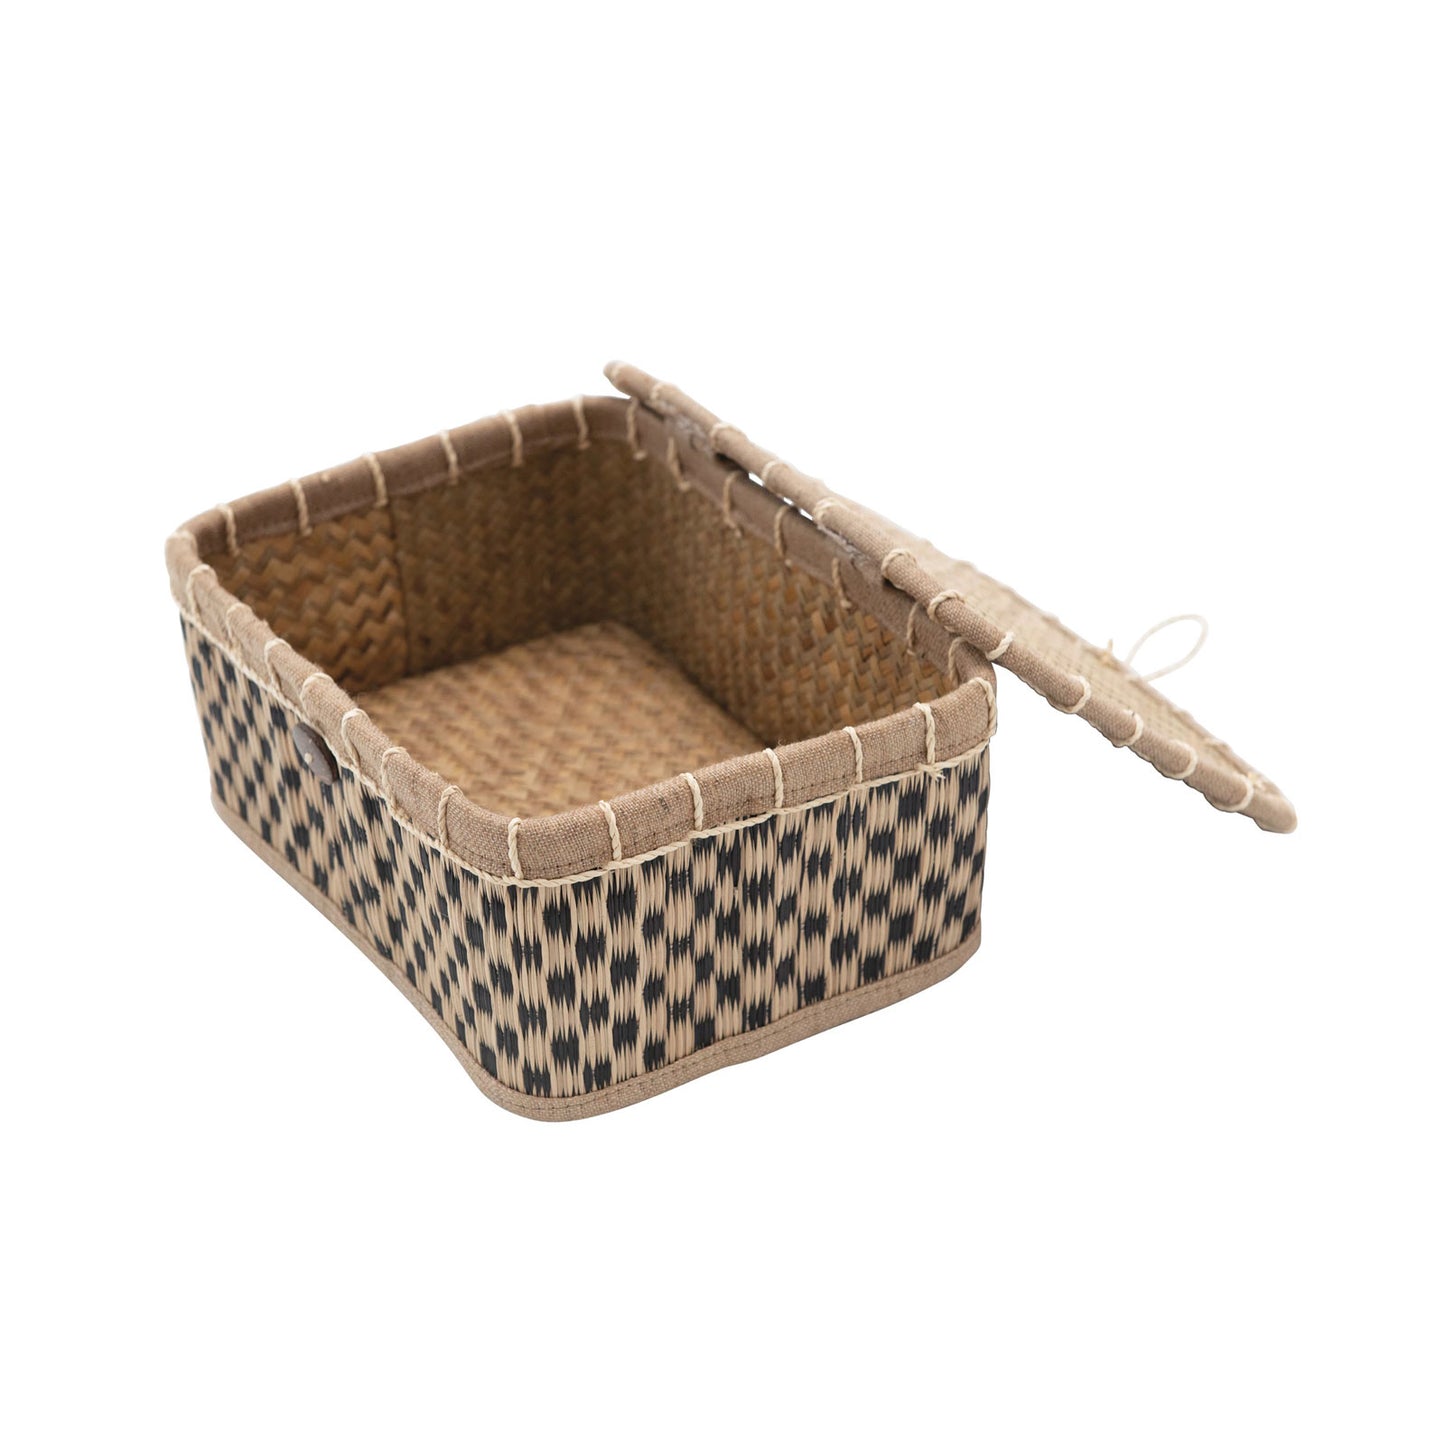 Hand-Woven Seagrass Box with Lid and Button Closure